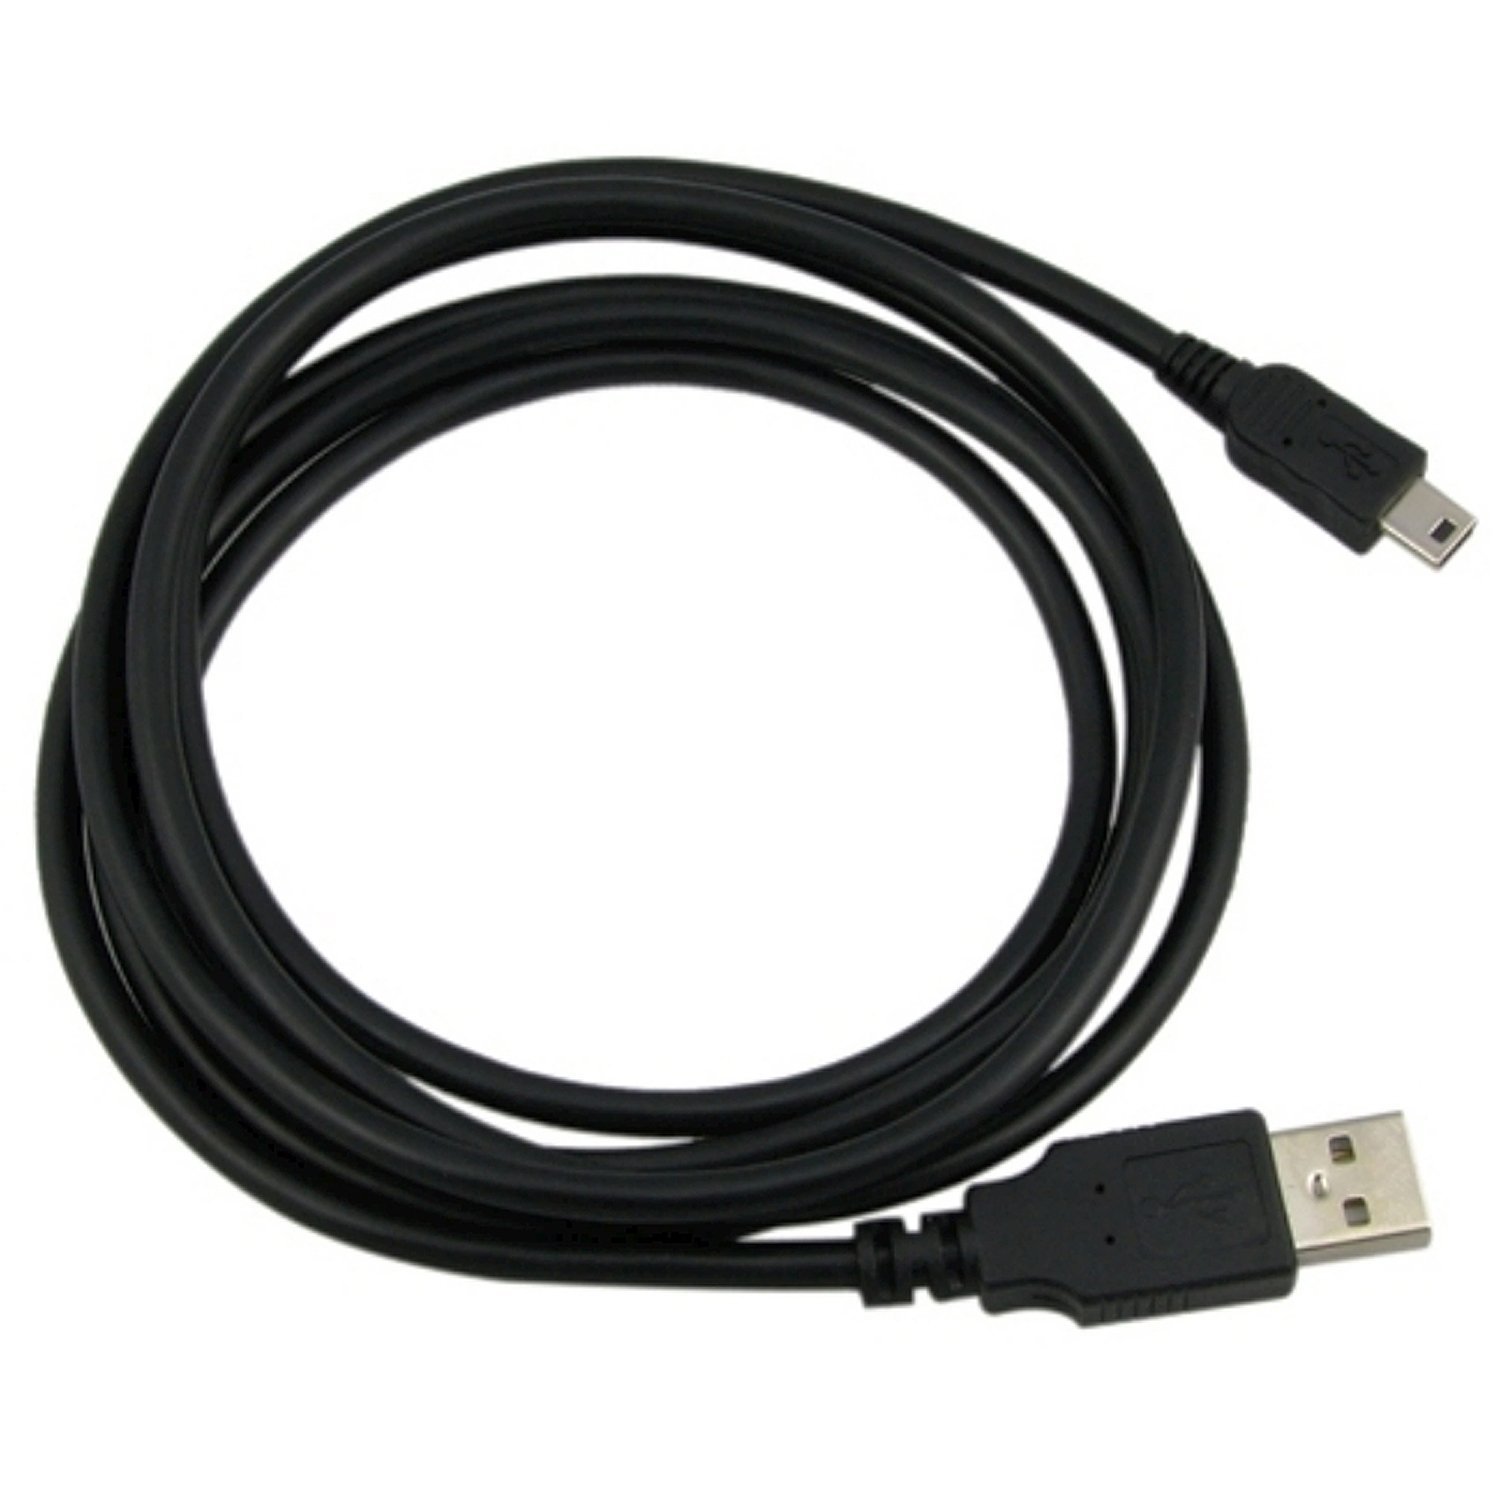 EpicDealz USB Charger Cable Cord for TI-84 Plus C Silver Edition nSpire CX Graphing Cal -10Ft - image 2 of 4